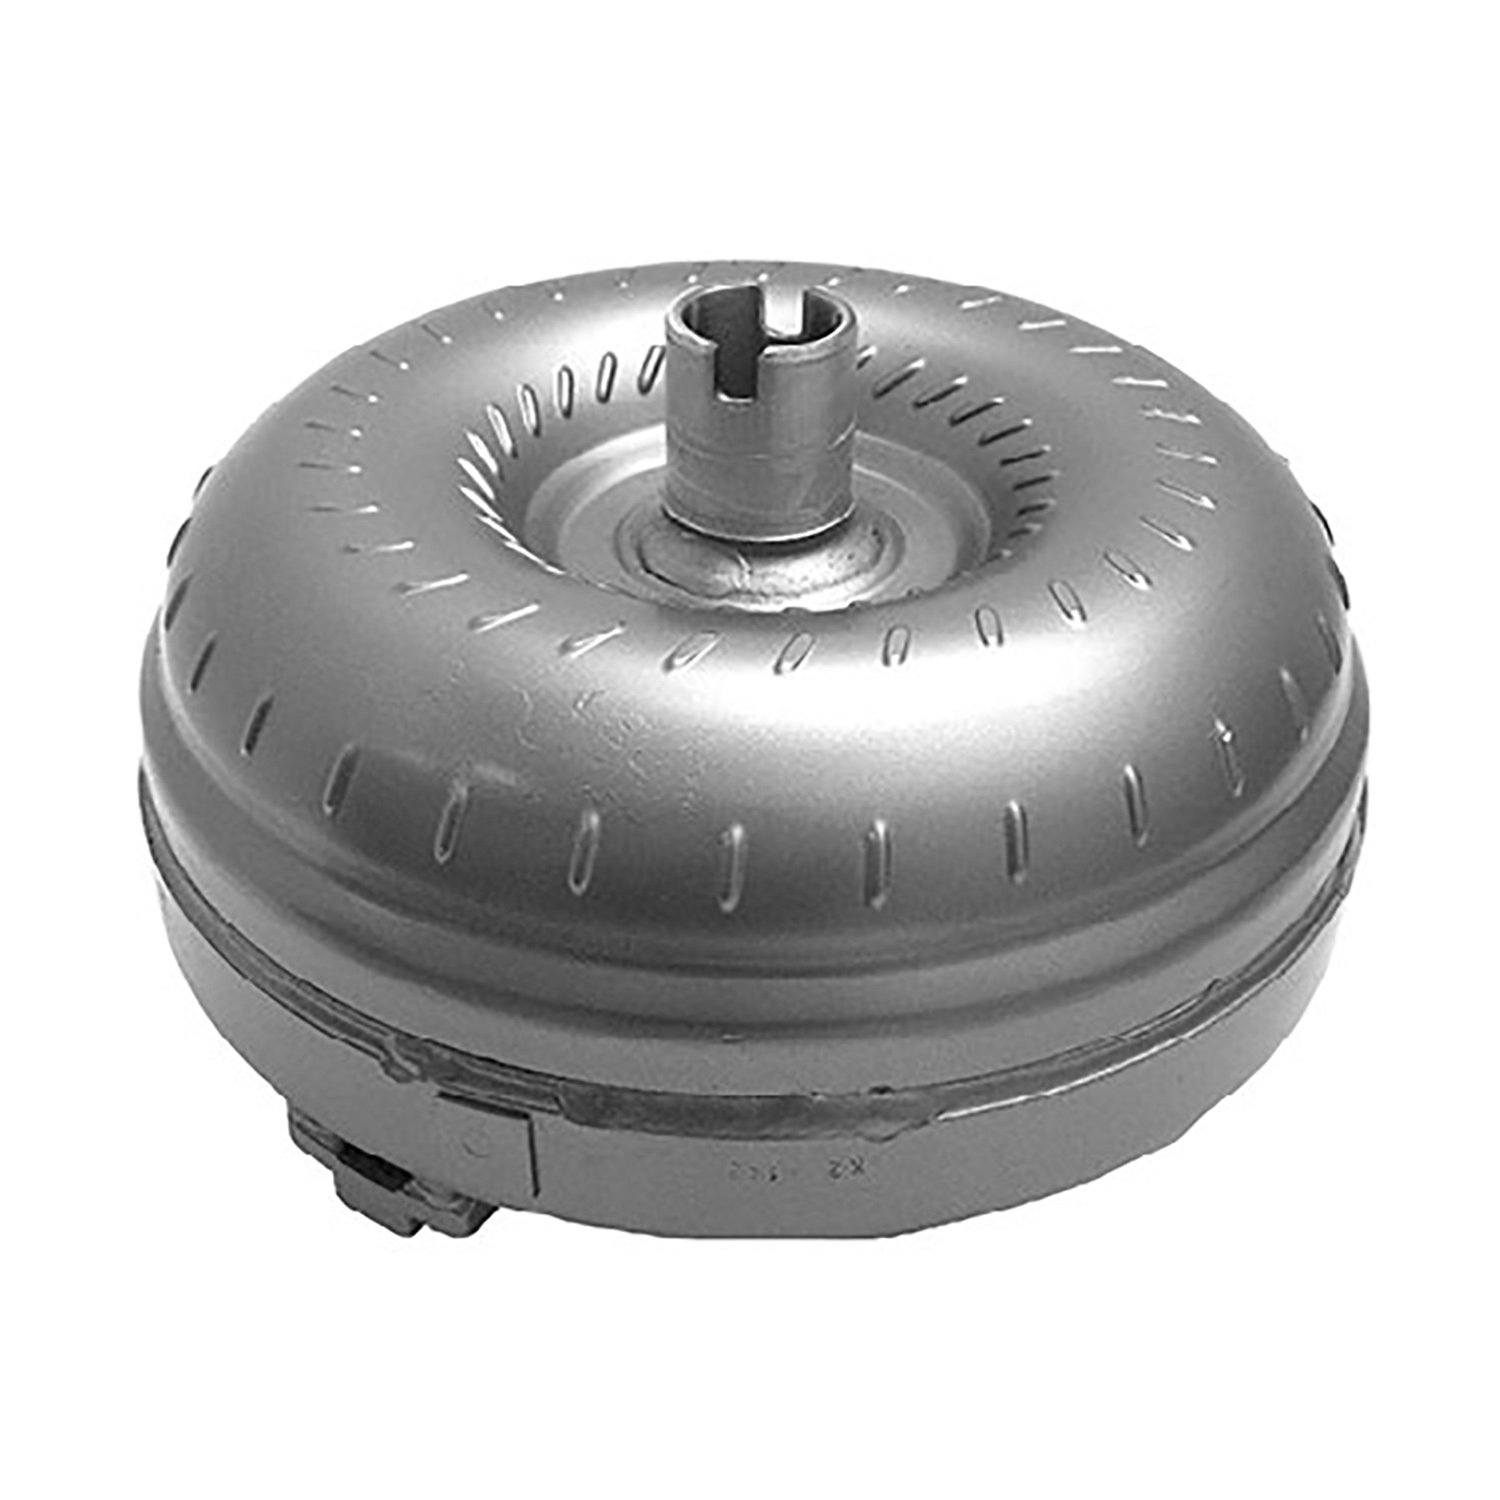 Remanufactured Automatic Transmission Torque Converter for GM 4.2 4L60E 02-08 XHS HD